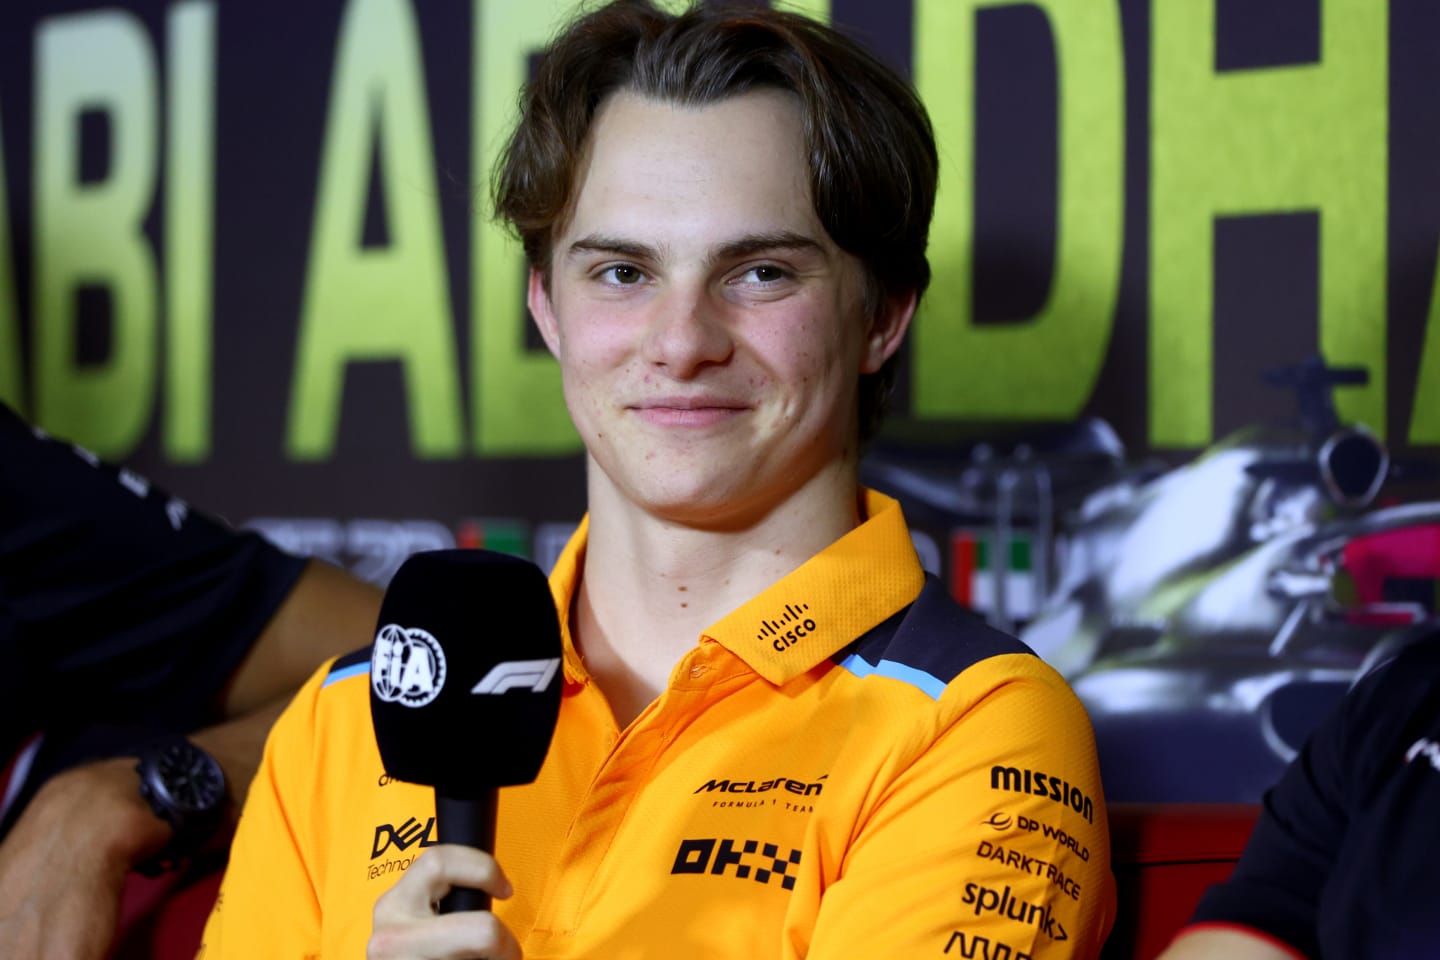 ABU DHABI, UNITED ARAB EMIRATES - NOVEMBER 23: Oscar Piastri of Australia and McLaren attends the Drivers Press Conference during previews ahead of the F1 Grand Prix of Abu Dhabi at Yas Marina Circuit on November 23, 2023 in Abu Dhabi, United Arab Emirates. (Photo by Clive Rose/Getty Images)